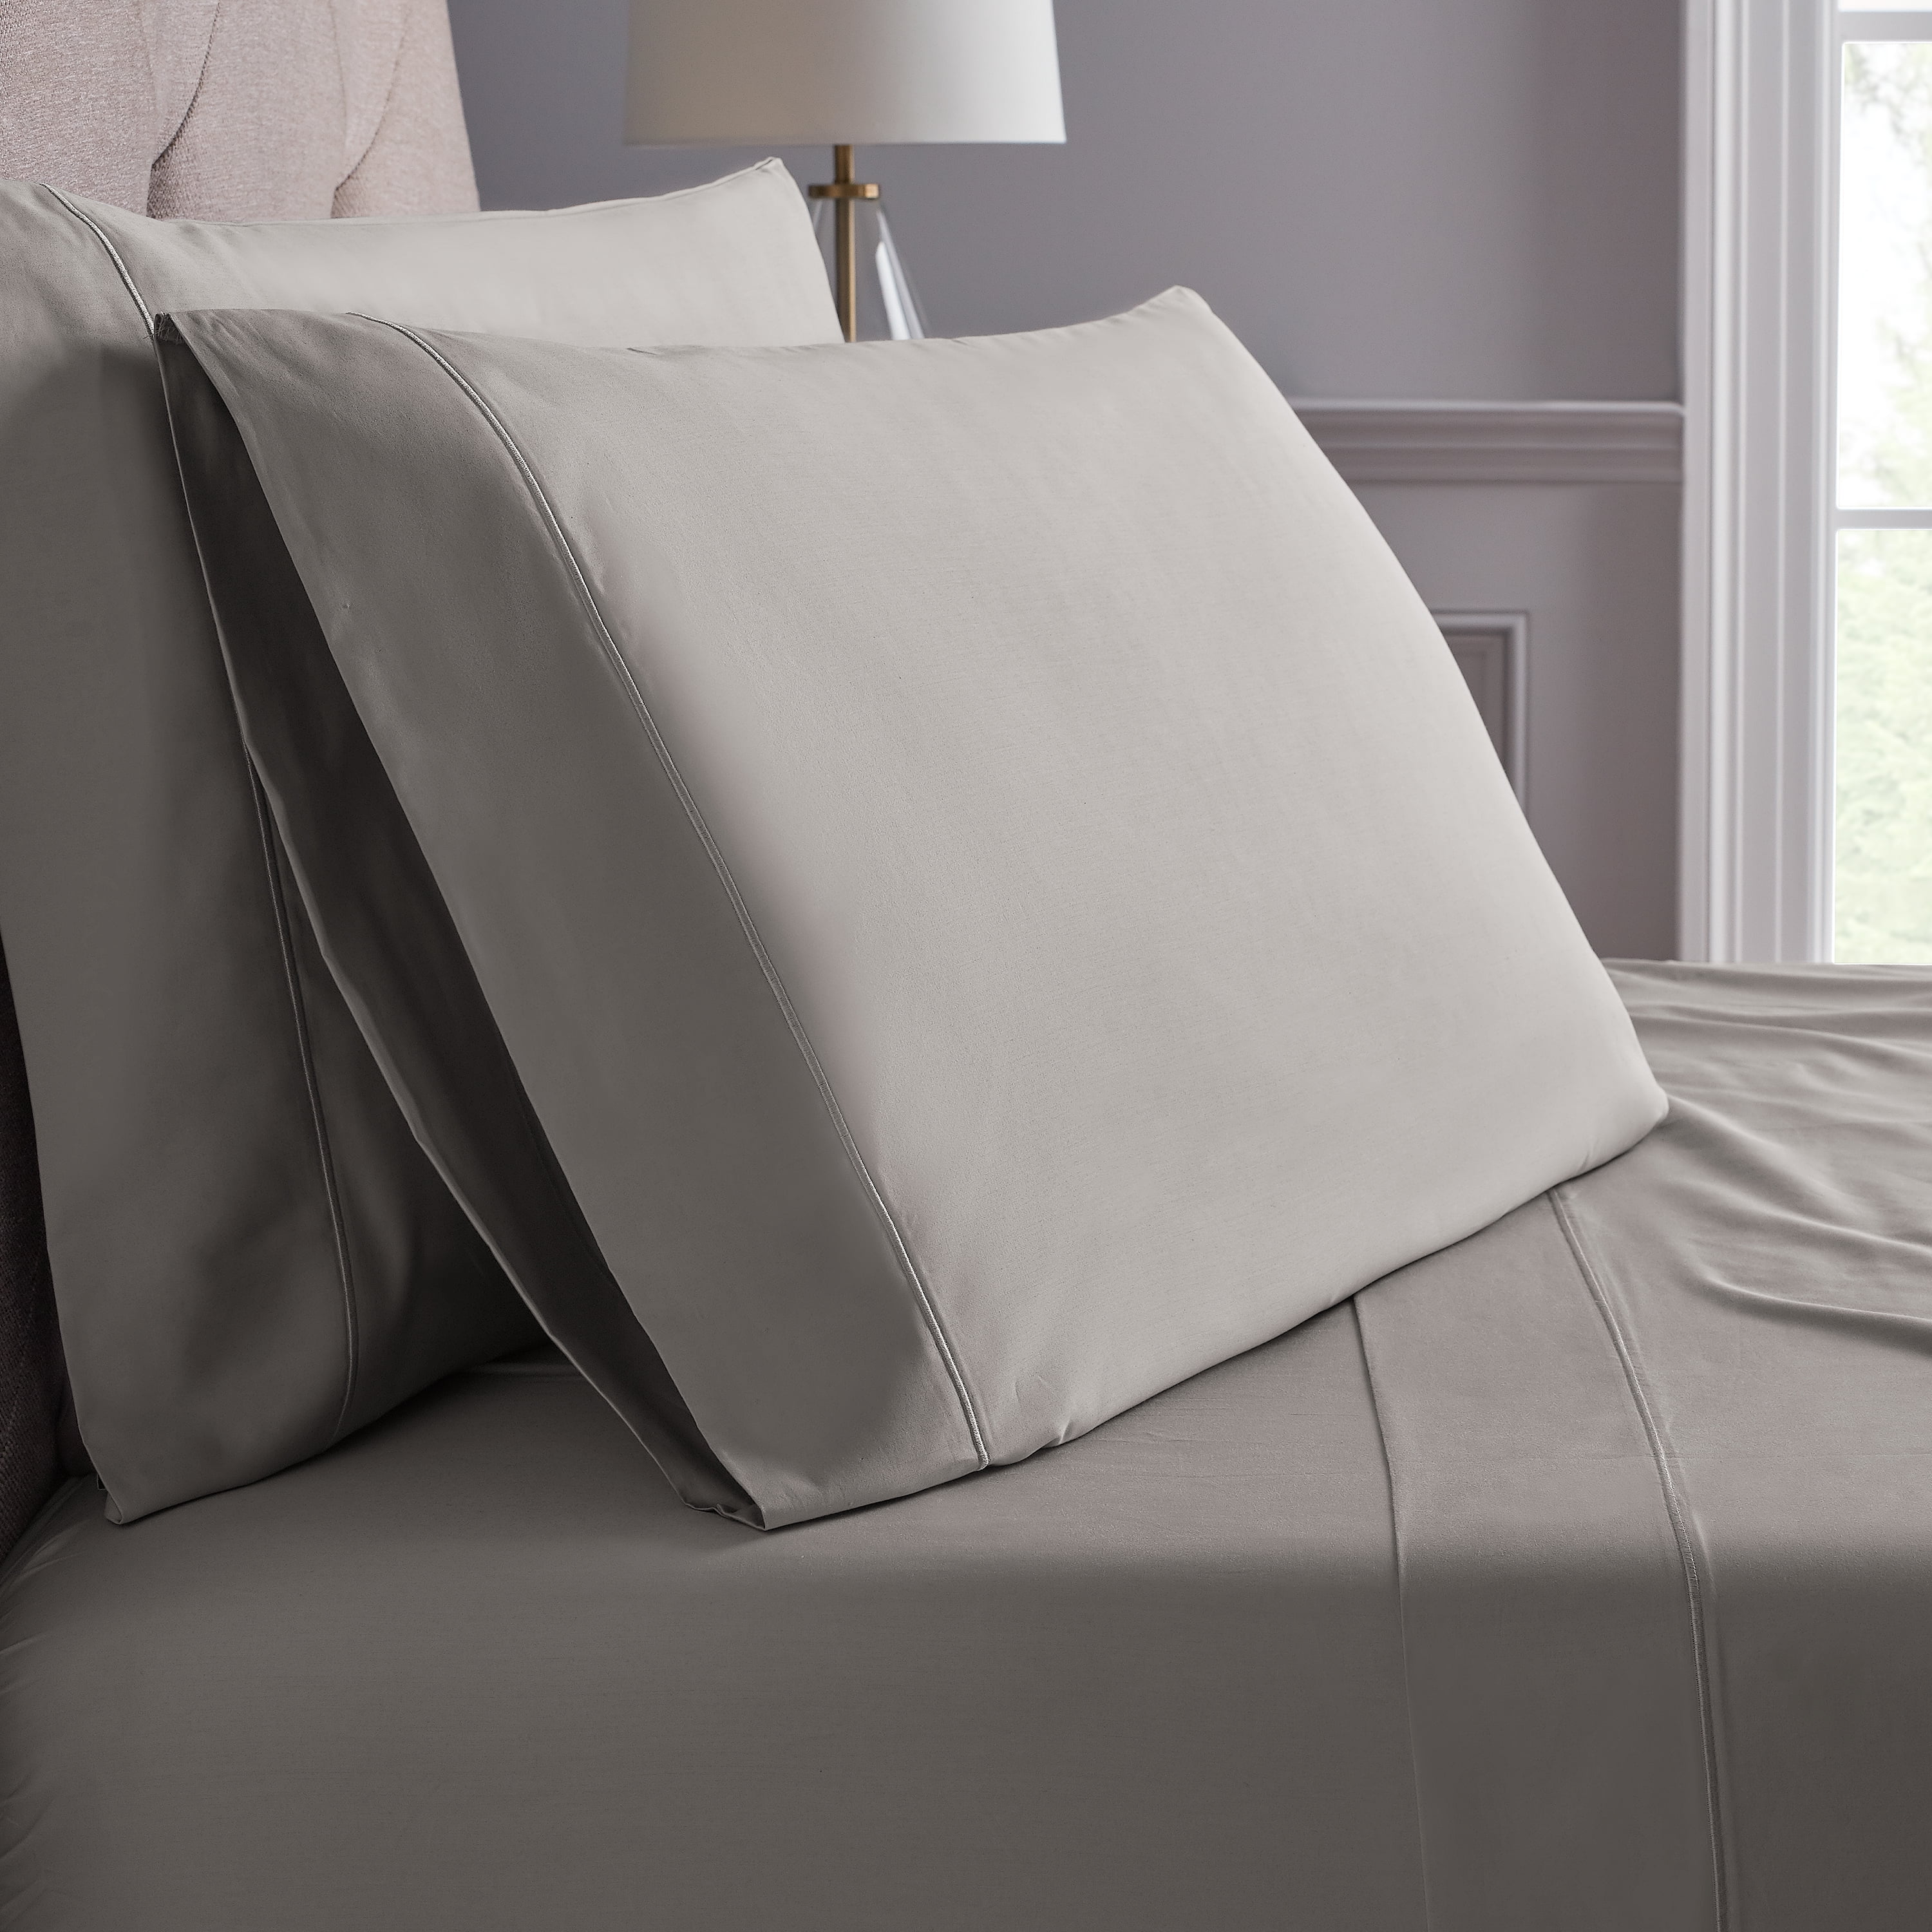 Luxury Percale Duvet Cover Or Pillowcase Or Sheets Bedding 1000 Thread Count 